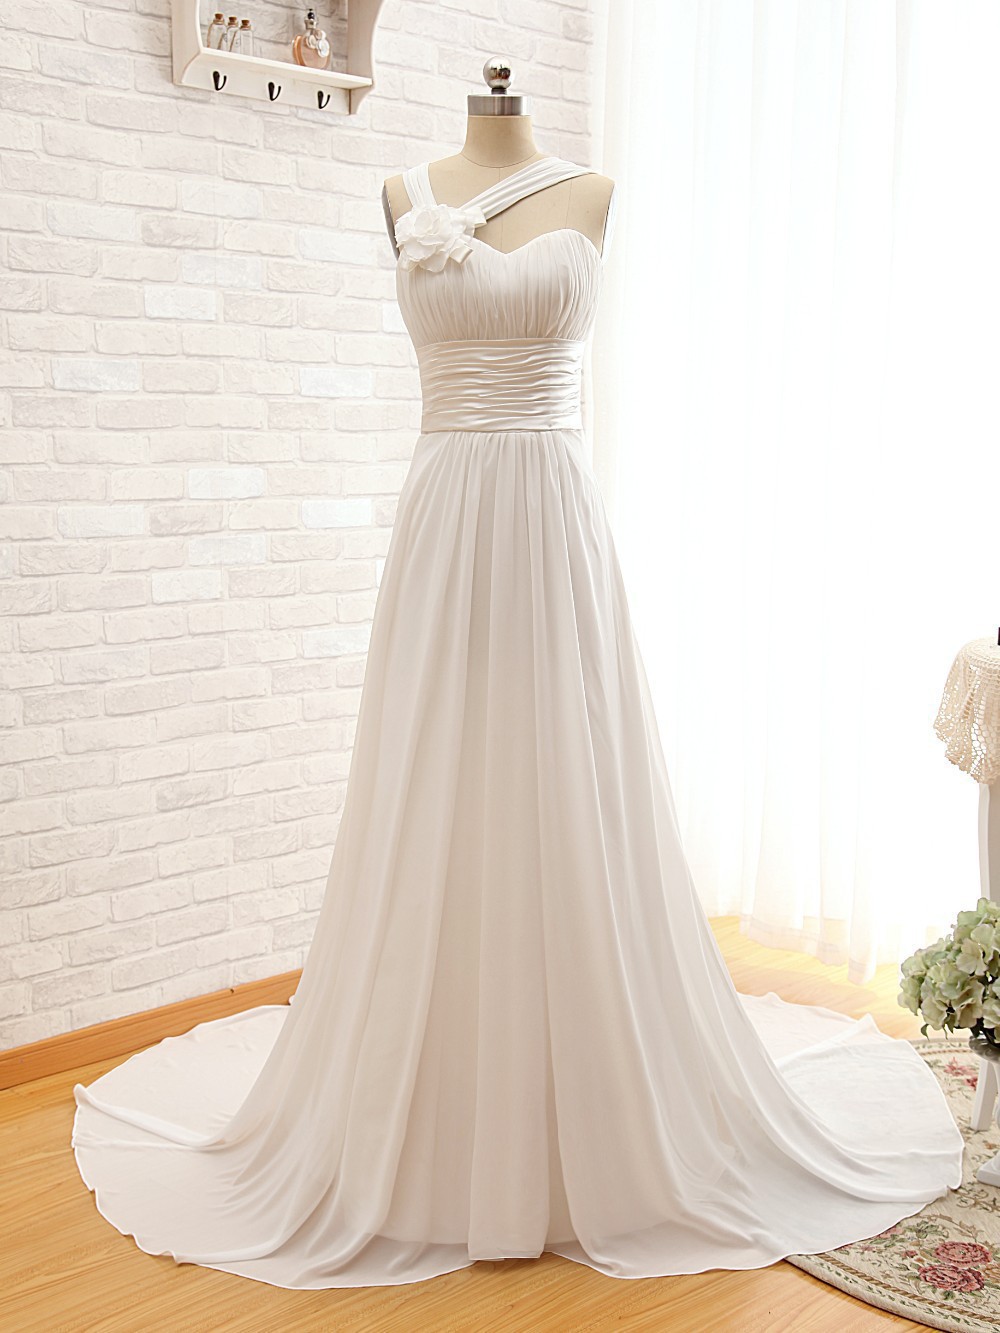 Sleeveless Off Shoulder Customize Floor Length Chapel Train Long Lace-up Wedding Dresses Bridal Gown